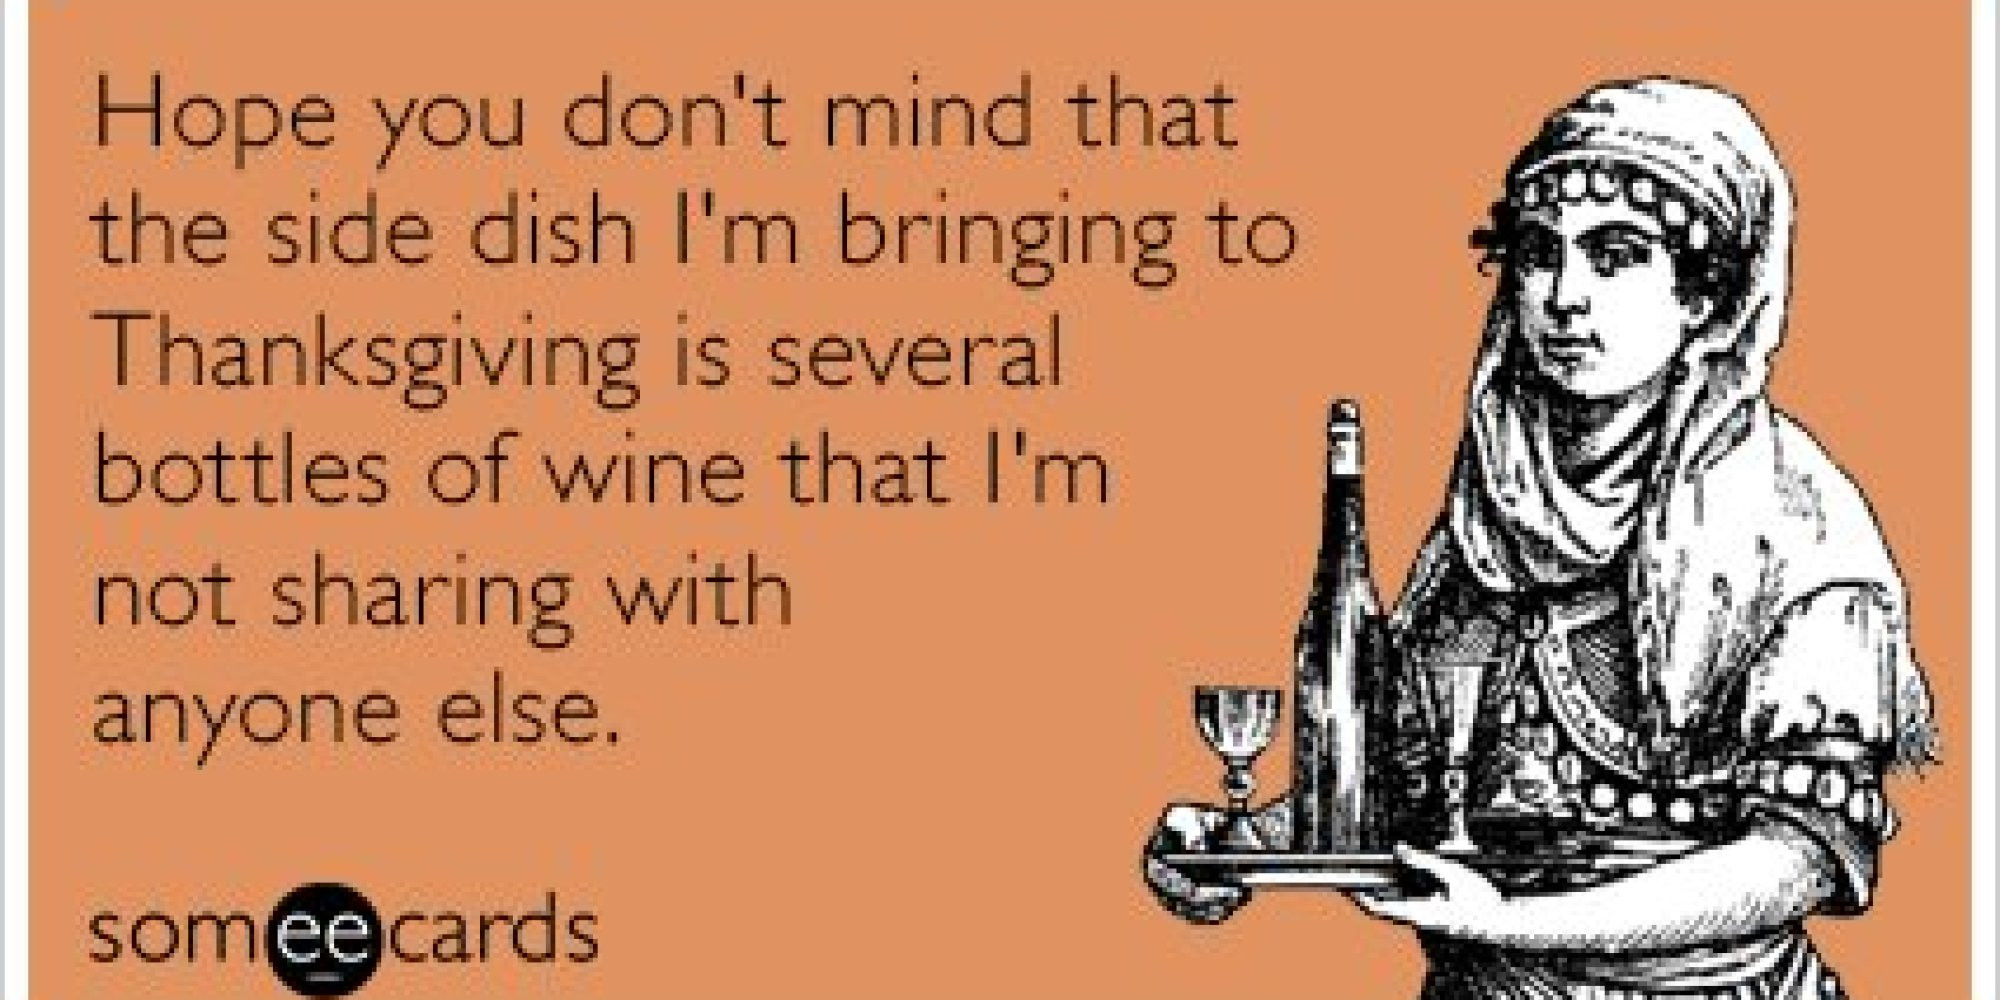 Humorous Thanksgiving Quotes
 17 Thanksgiving Someecards To Brighten Up Your Turkey Day